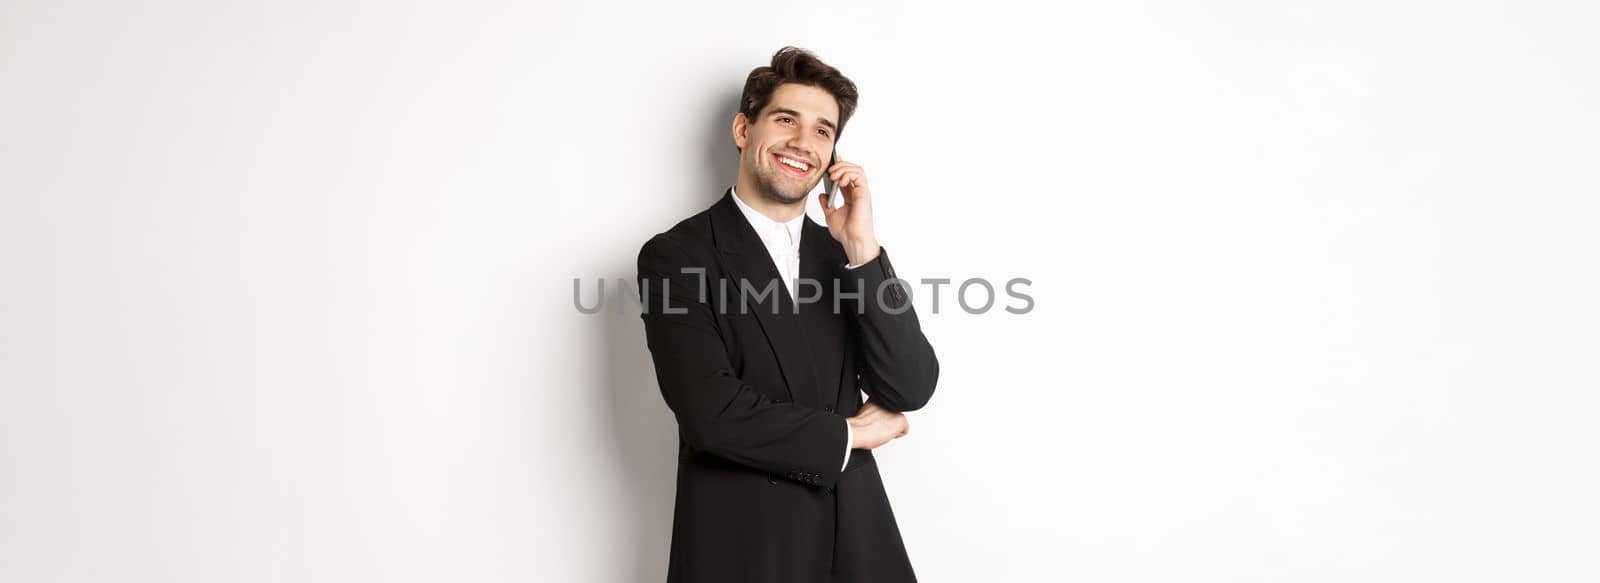 Image of handsome and successful businessman talking on phone, smiling pleased, standing in suit against white background.